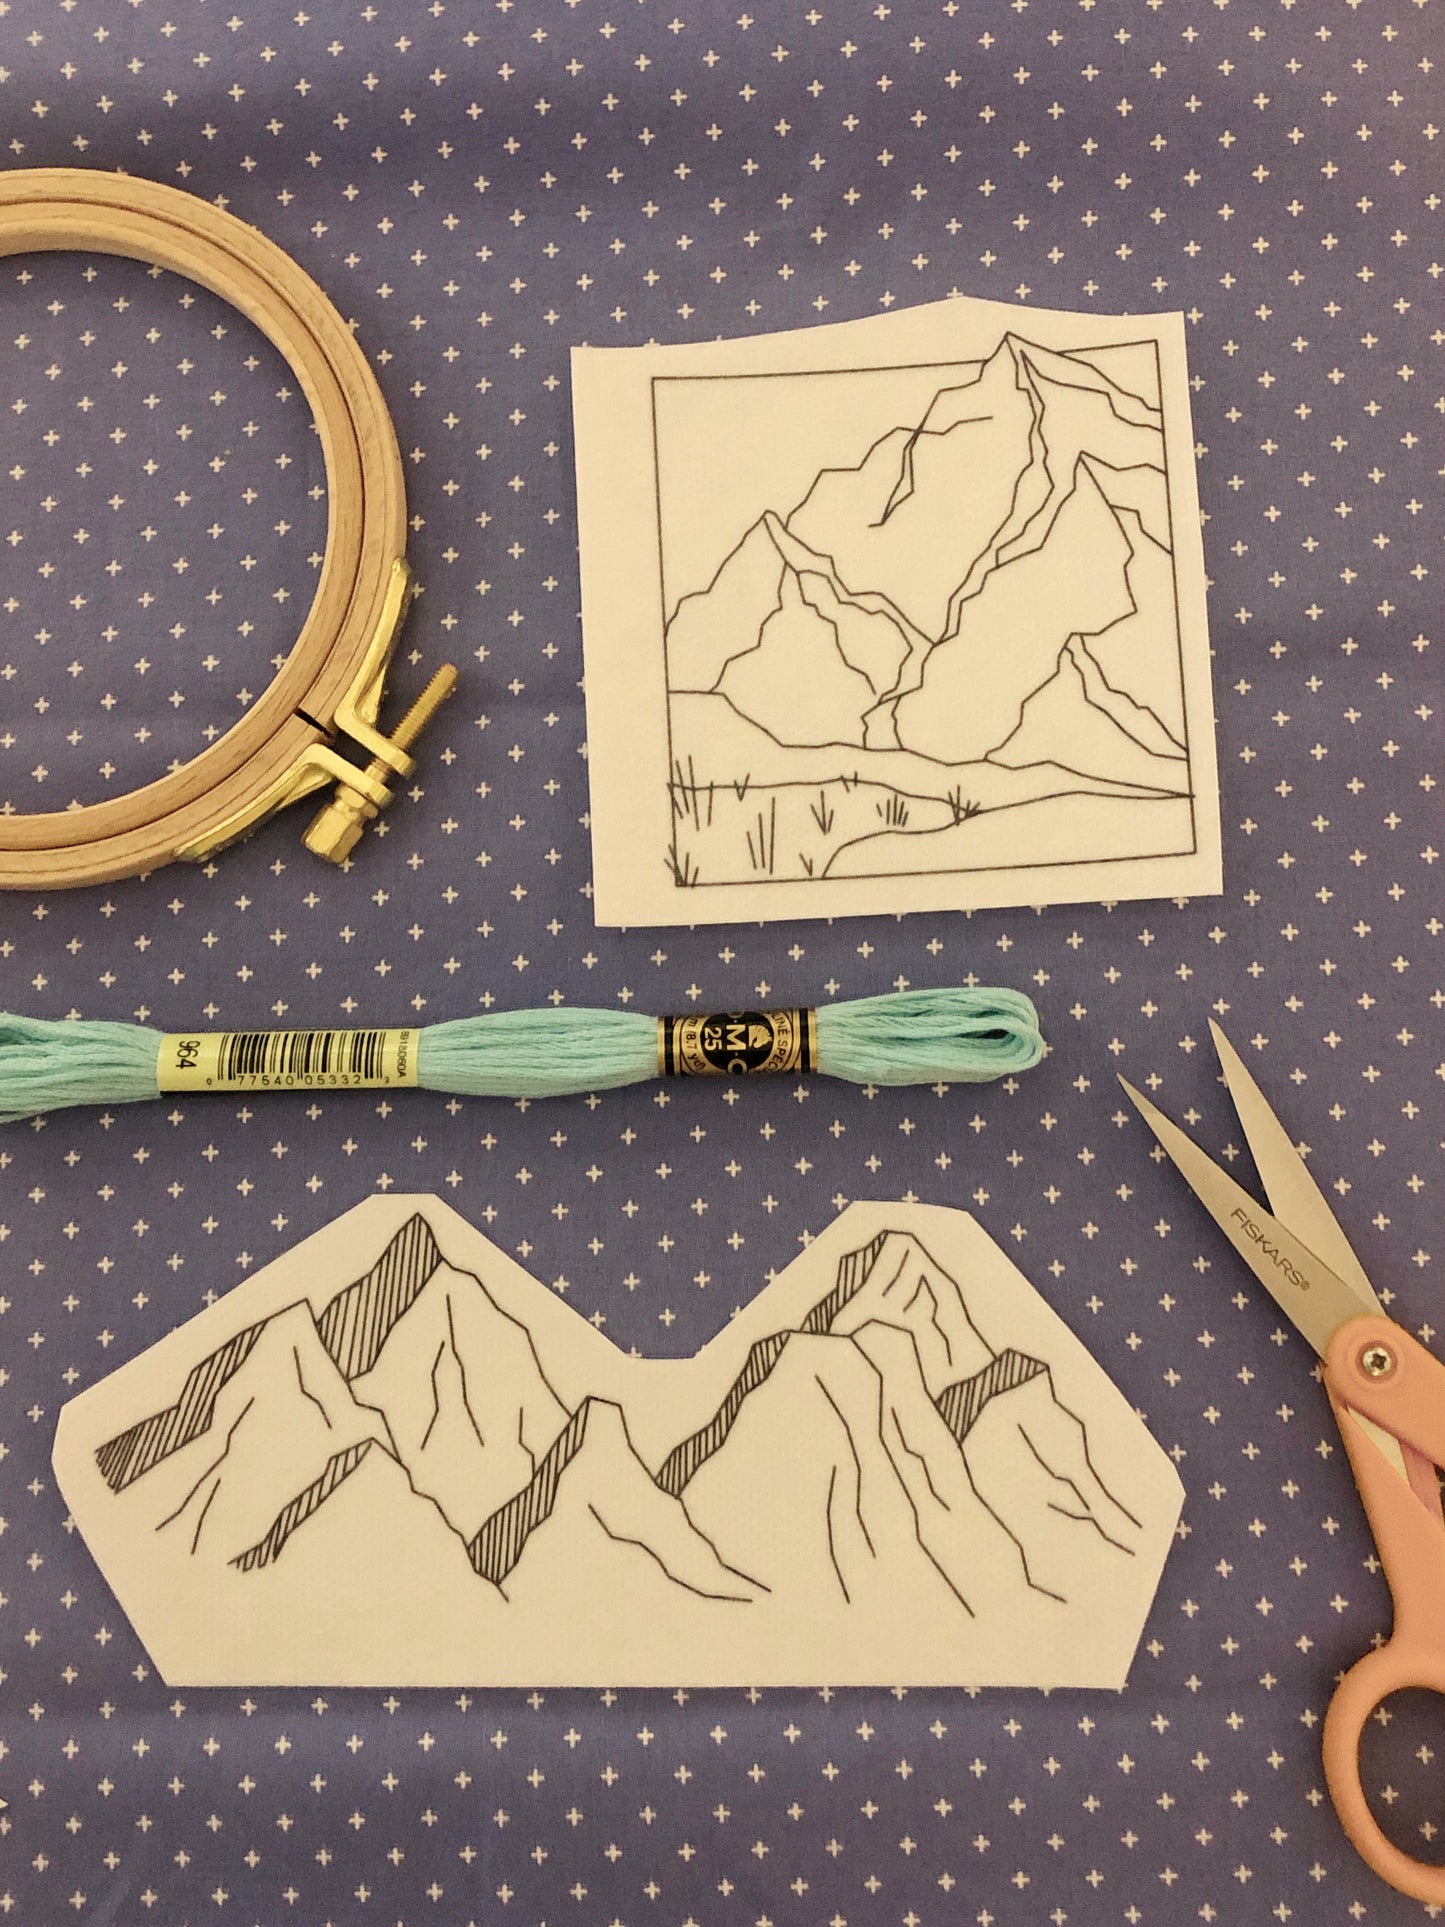 Mountains - Peel Stick and Stitch Hand Embroidery Patterns